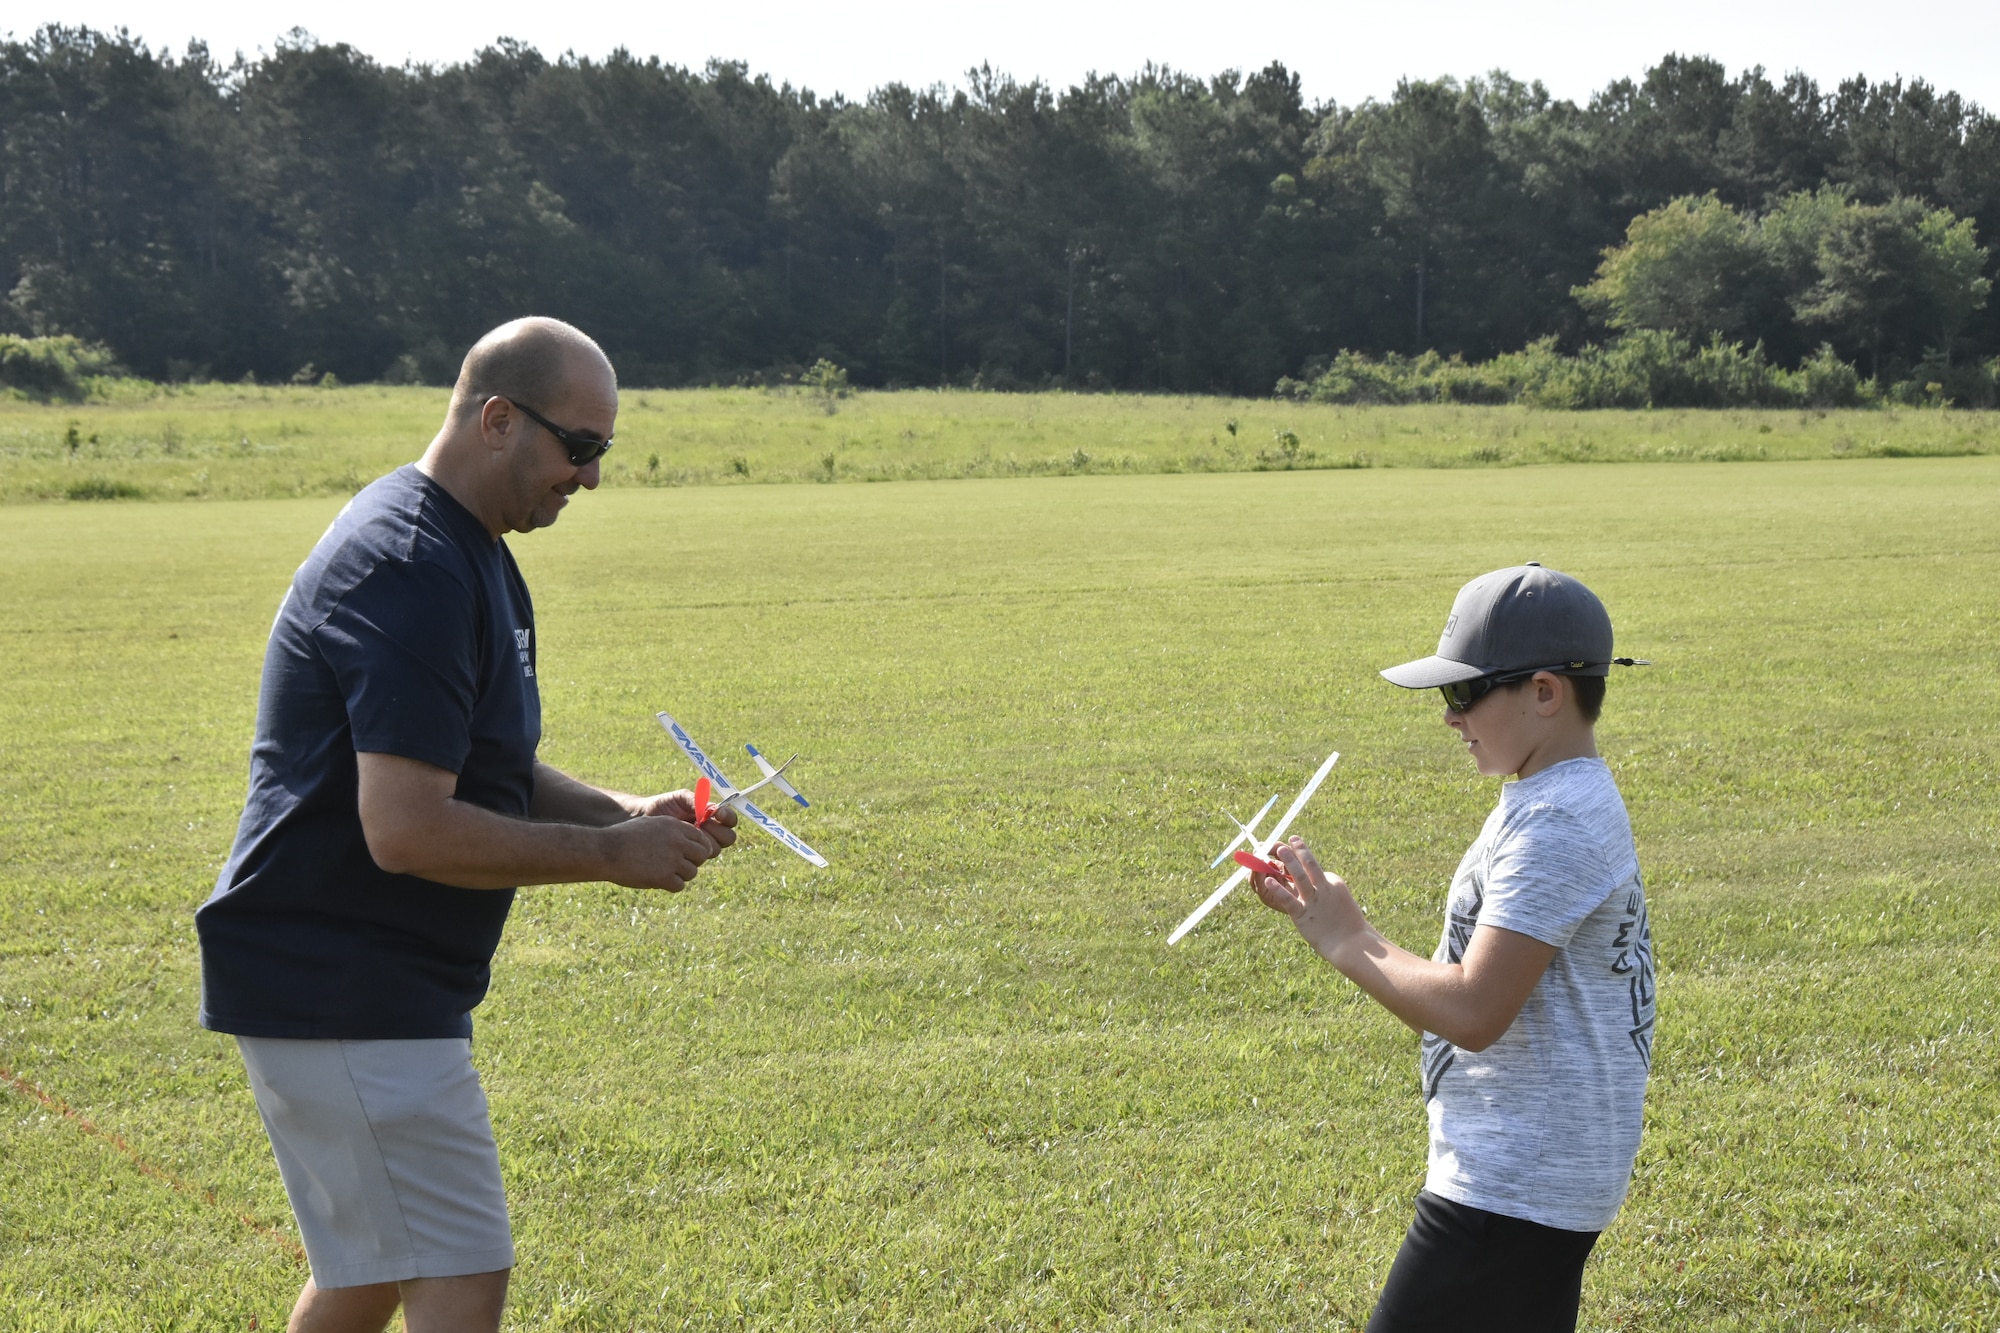 Larry Raydo, left, gives Bryce Spencer some advice on how to achieve a longer flight from his balsa wood airplane during a June 26, 2021, event hosted by the Coffee Airfoilers Model RC Club to coincide with the Arnold Engineering Development Complex 70th anniversary celebration. Youth participating in the event were tasked with assembling small balsa wood airplanes, with top prizes going to those whose planes flew the furthest from the launch line. The event was intended to promote science, technology, engineering and mathematics, or STEM, interest among students taking part. (U.S. Air Force photo by Bradley Hicks)